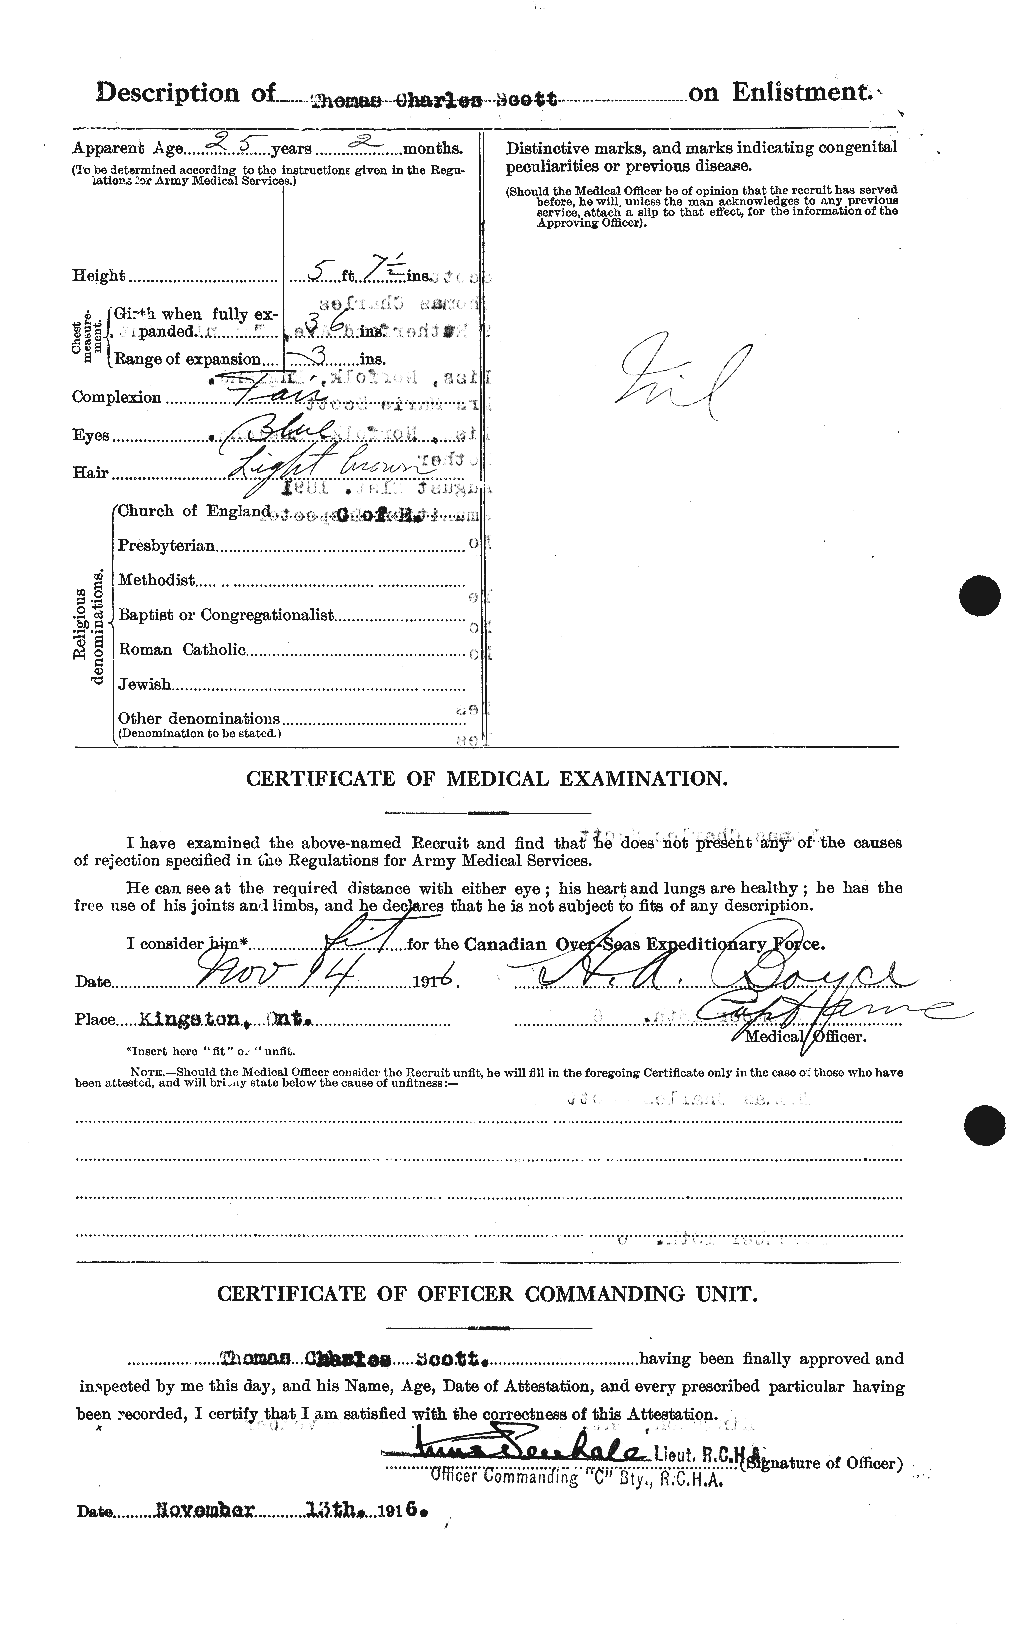 Personnel Records of the First World War - CEF 088520b